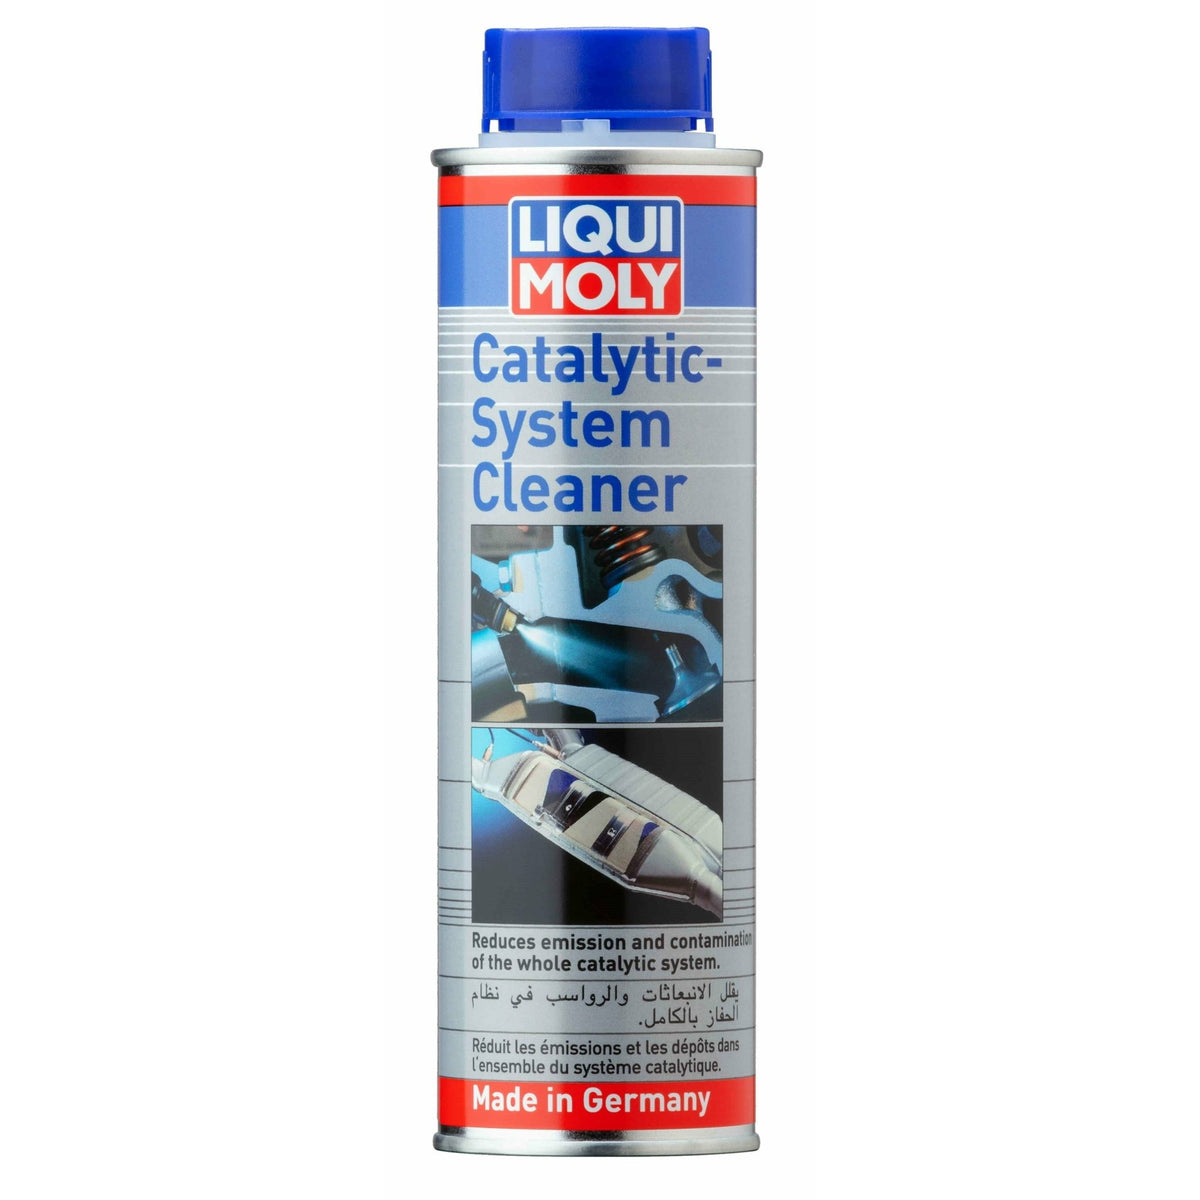 Liqui Moly 8931 Catalytic-System Cleaner 300ml